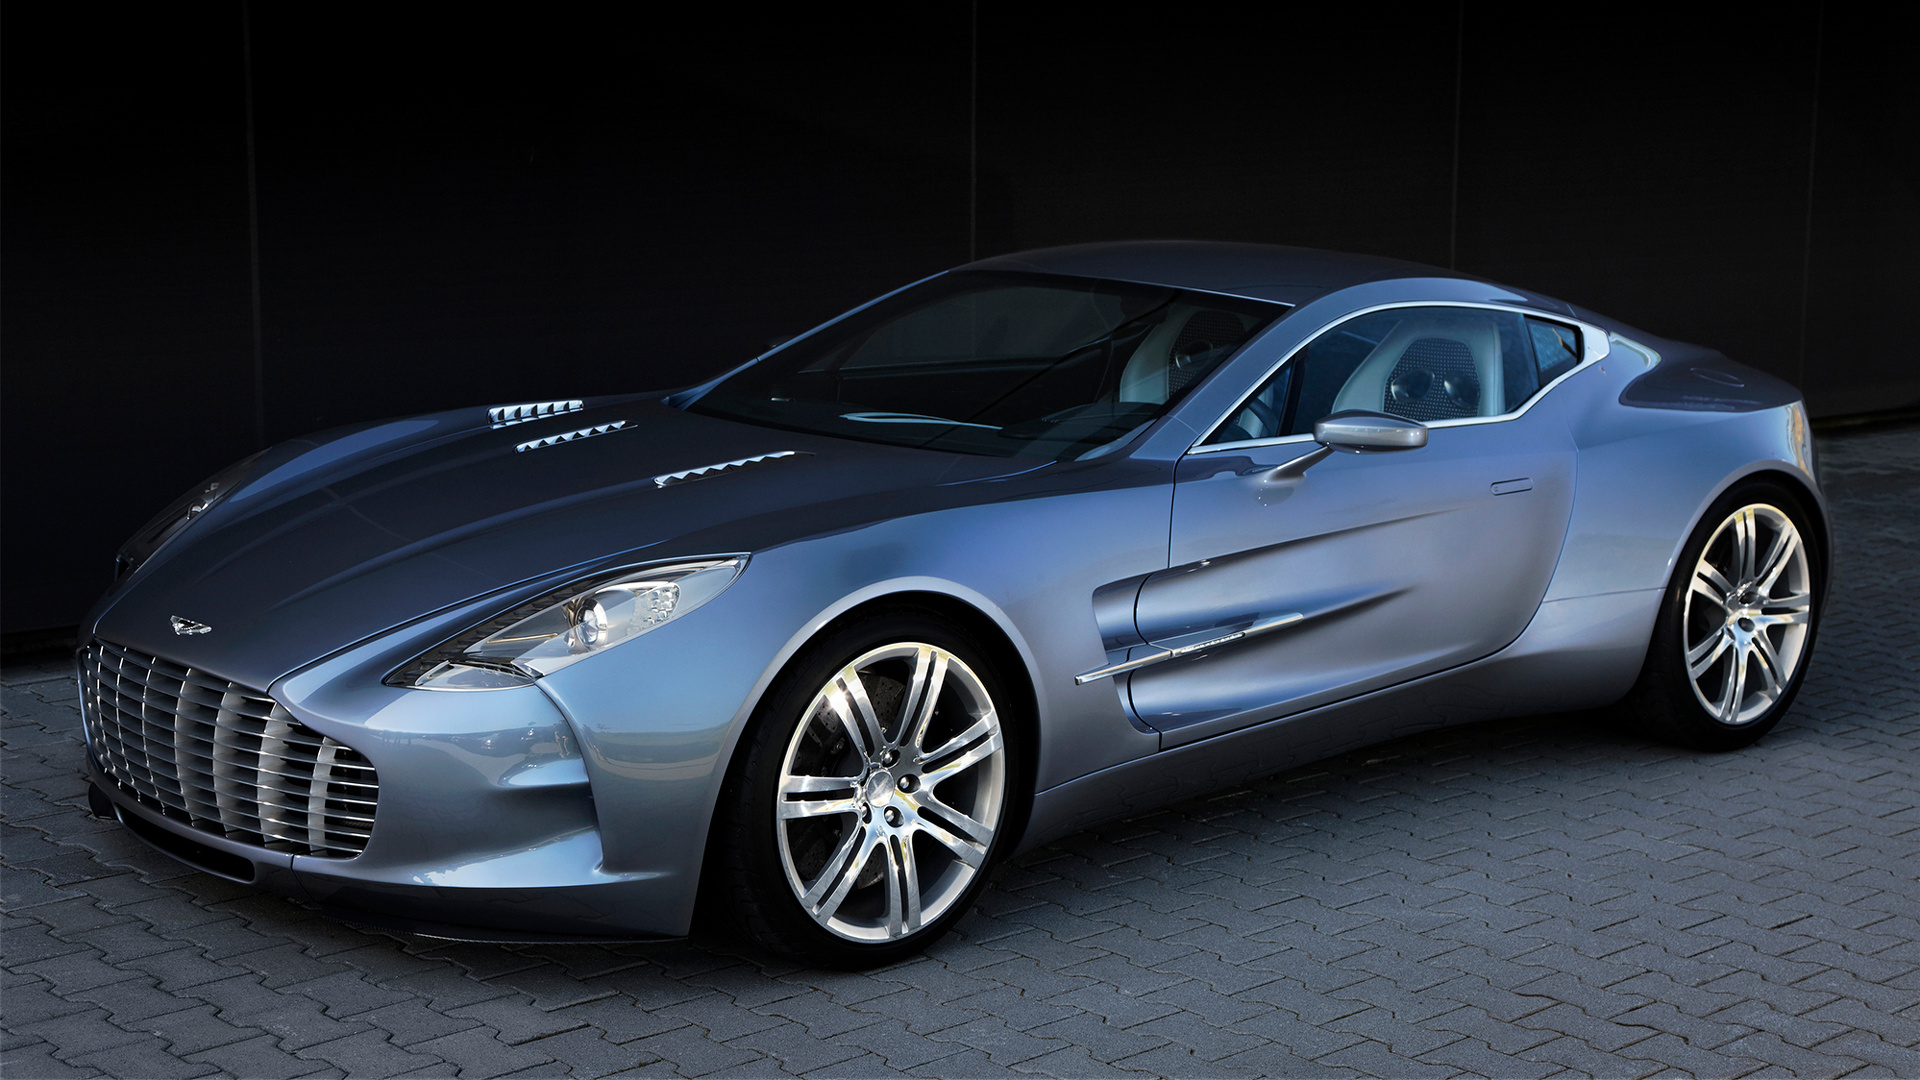 Aston Martin One-77, News and tests, Exclusive luxury, Sophisticated design, 1920x1080 Full HD Desktop